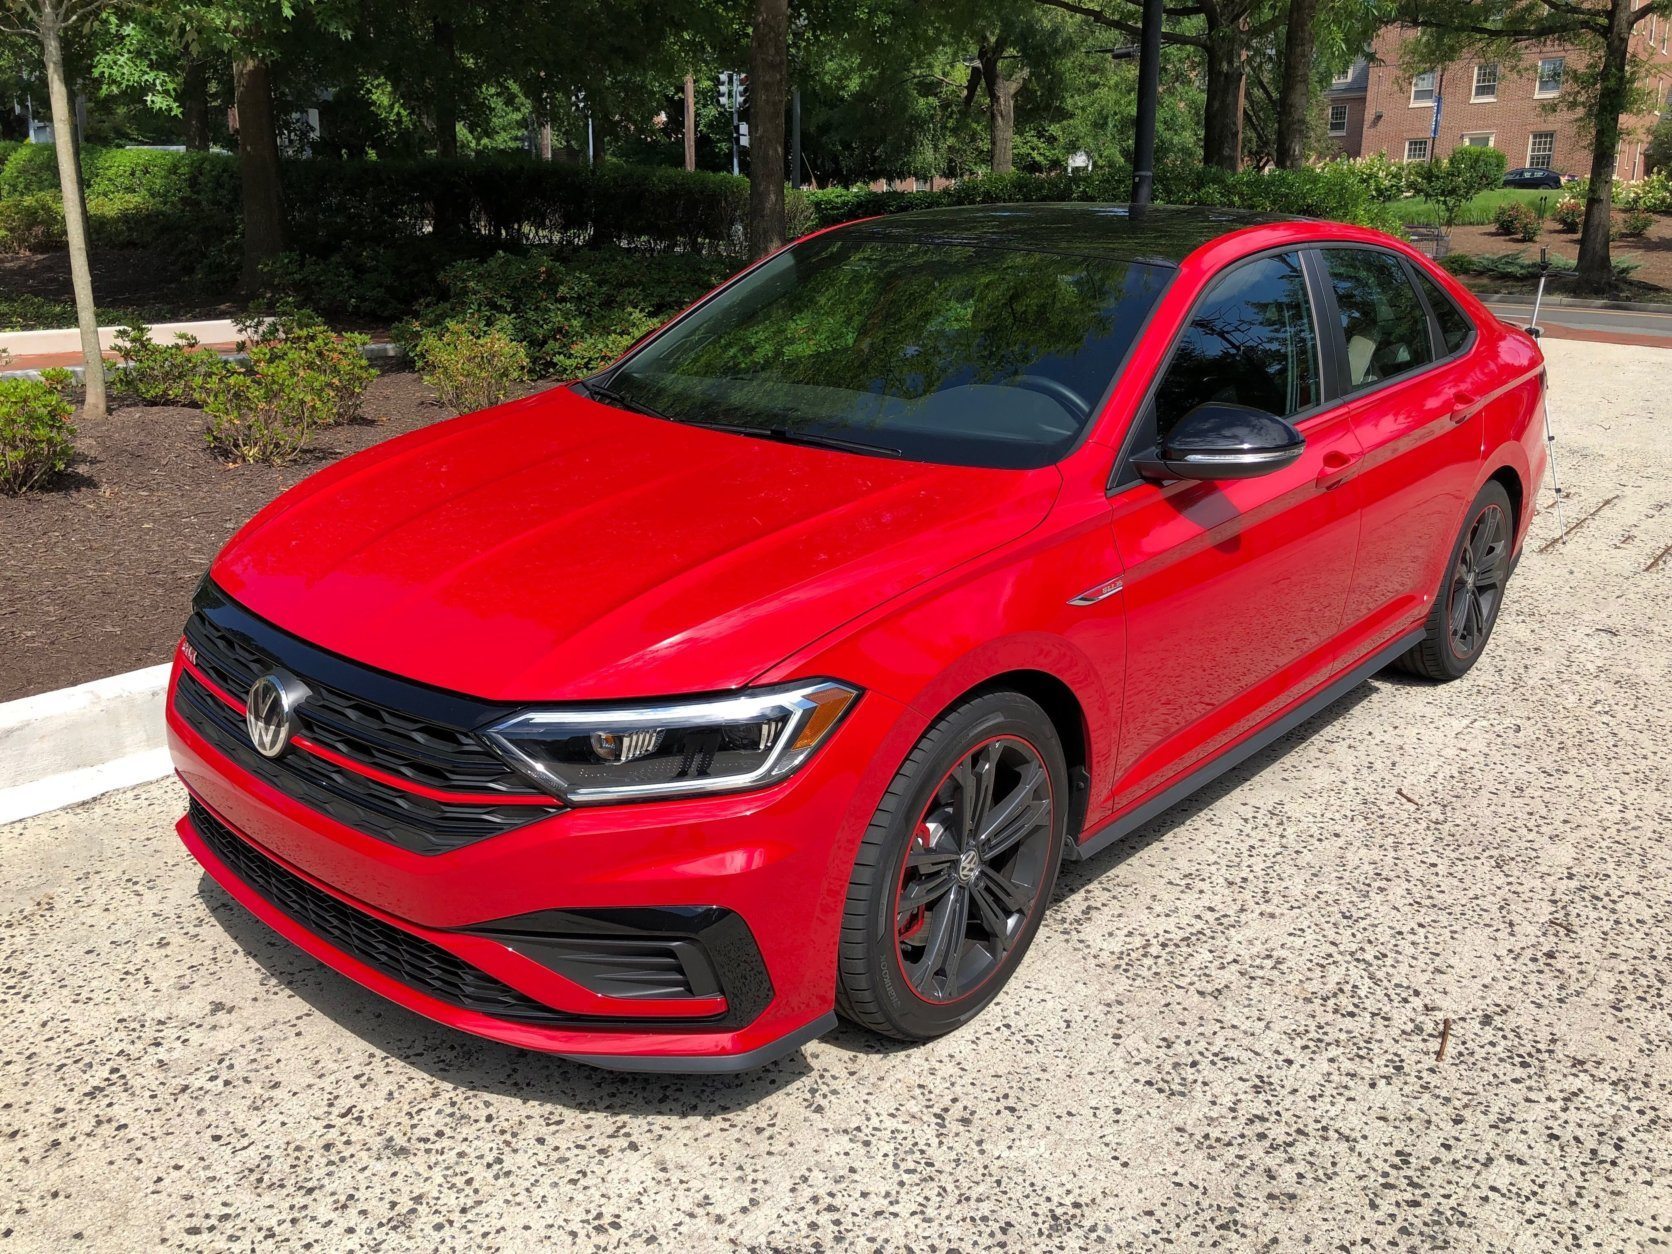 <p>The smooth manual transmission adds to the fun factor. The black and red exterior touches lend a meanness to the otherwise sedate car.</p>
